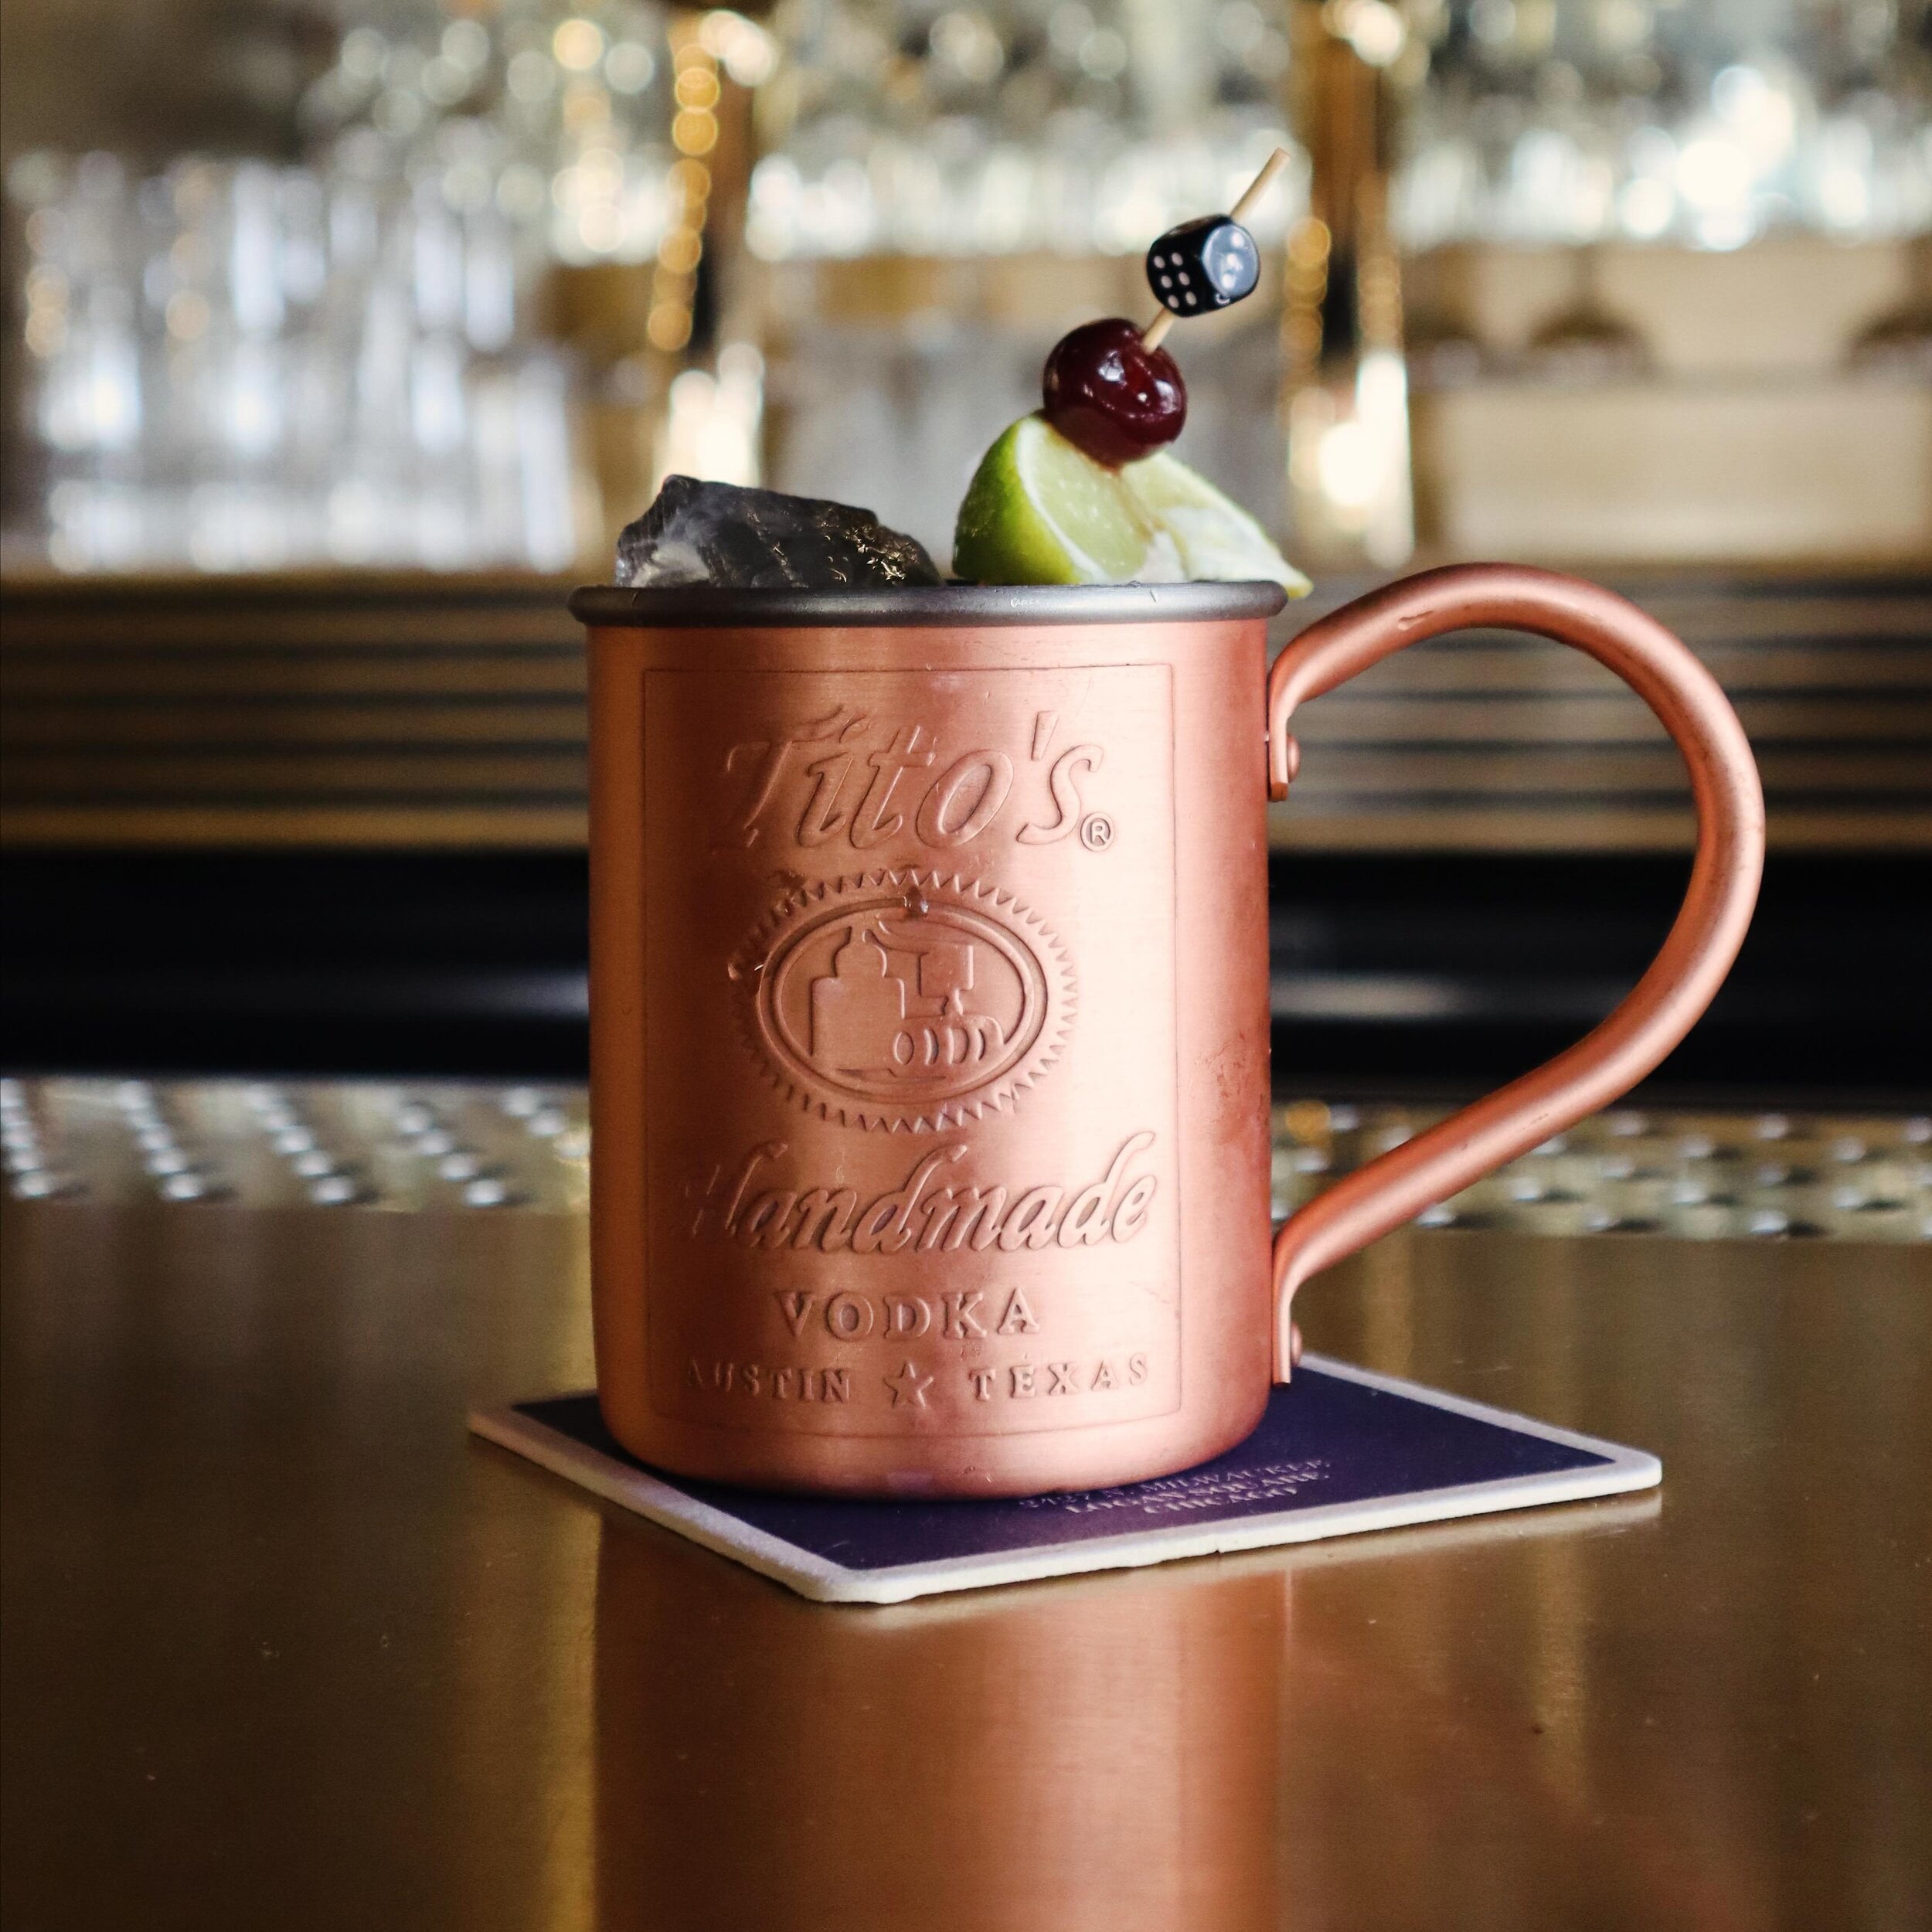 We&rsquo;ve got your fix for National Moscow Mule Day&hellip;

Try our Cherry Mule today 🍒